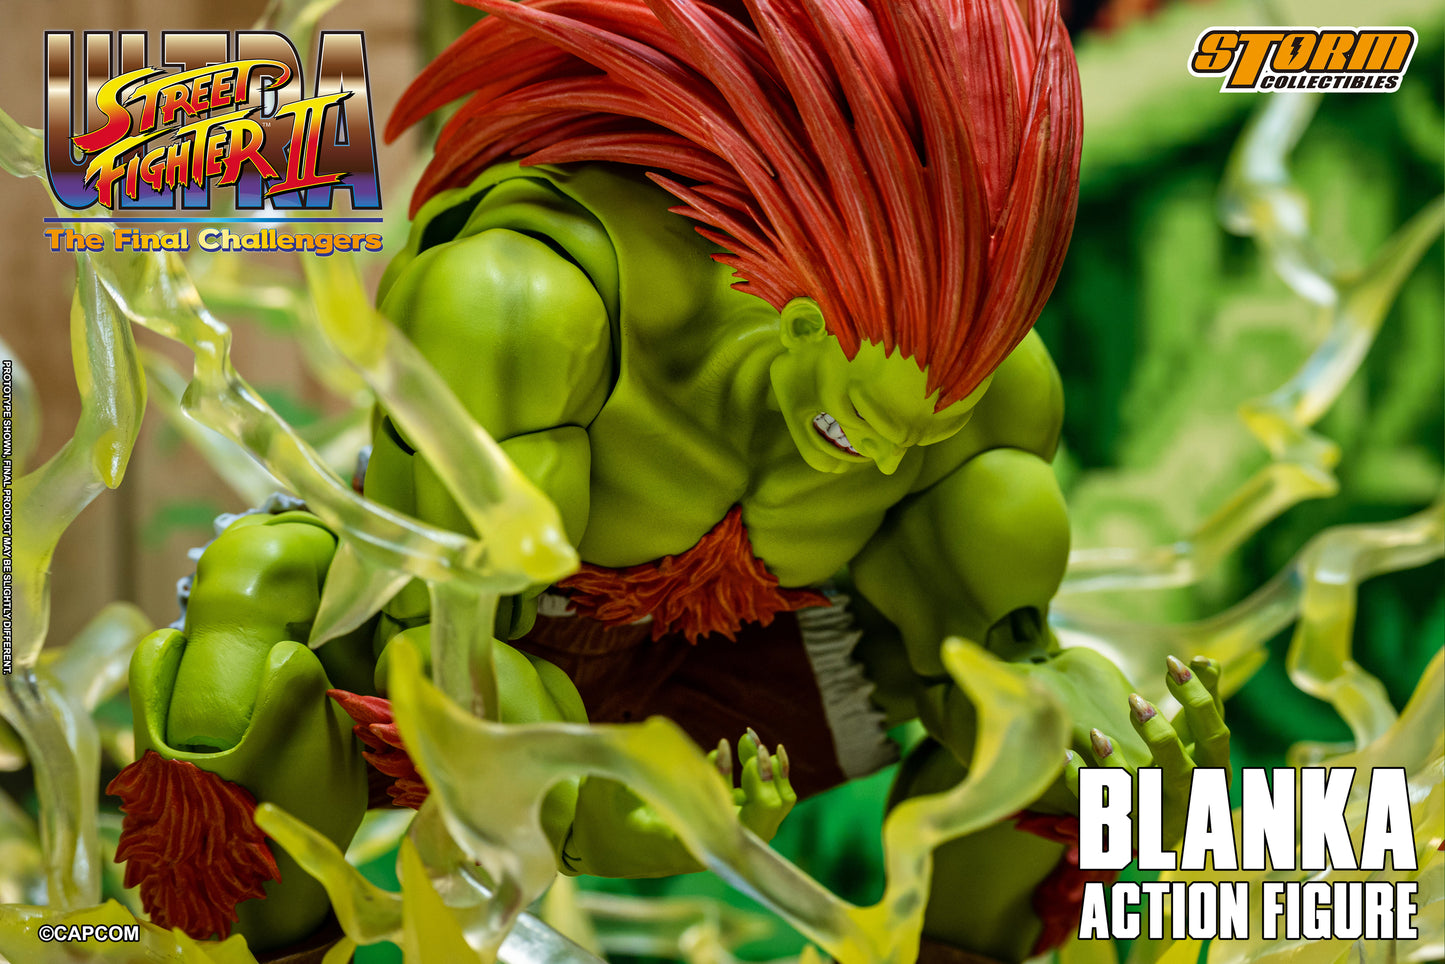 STORM COLLECTIBLES BLANKA ULTRA STREET FIGHTER II 1/12